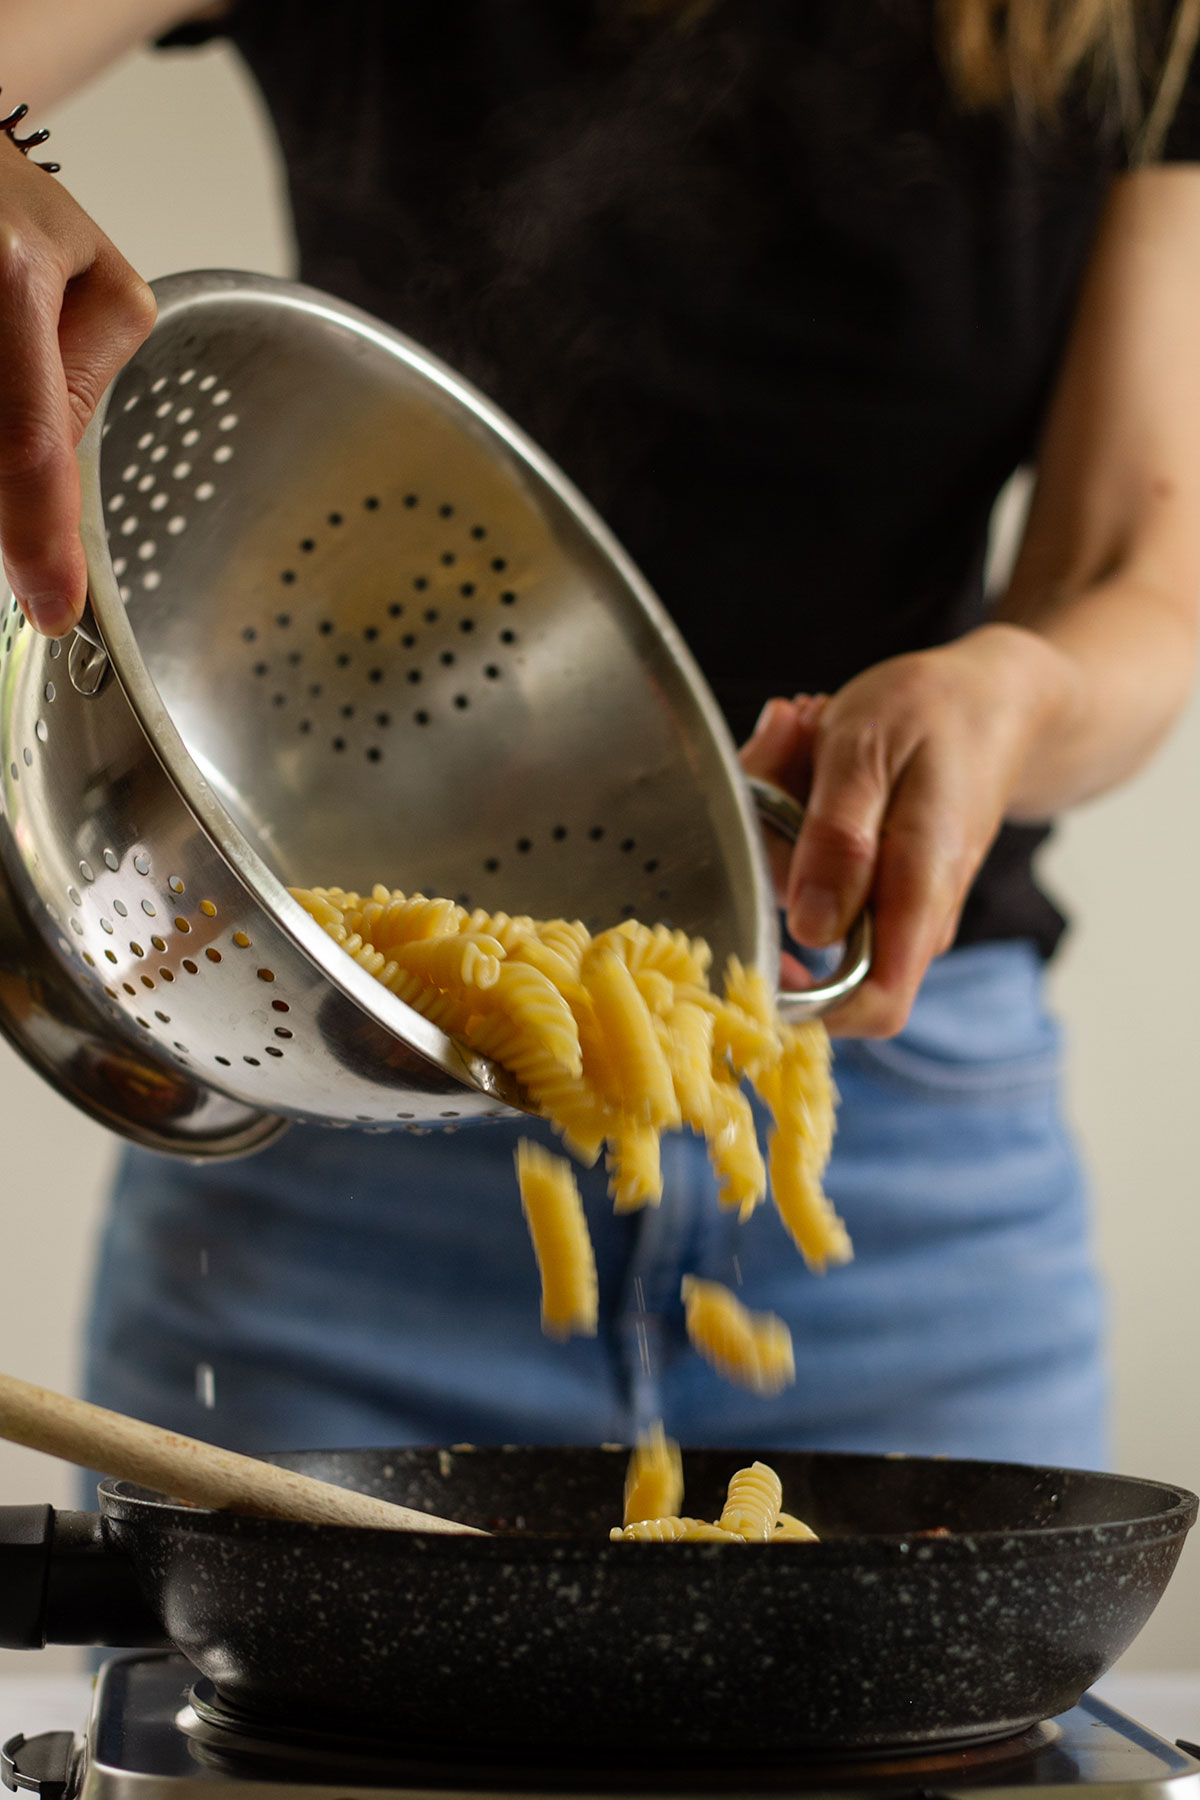 Pouring the cooked pasta from a silver colander into the sauce in a dark coloured frying pan.